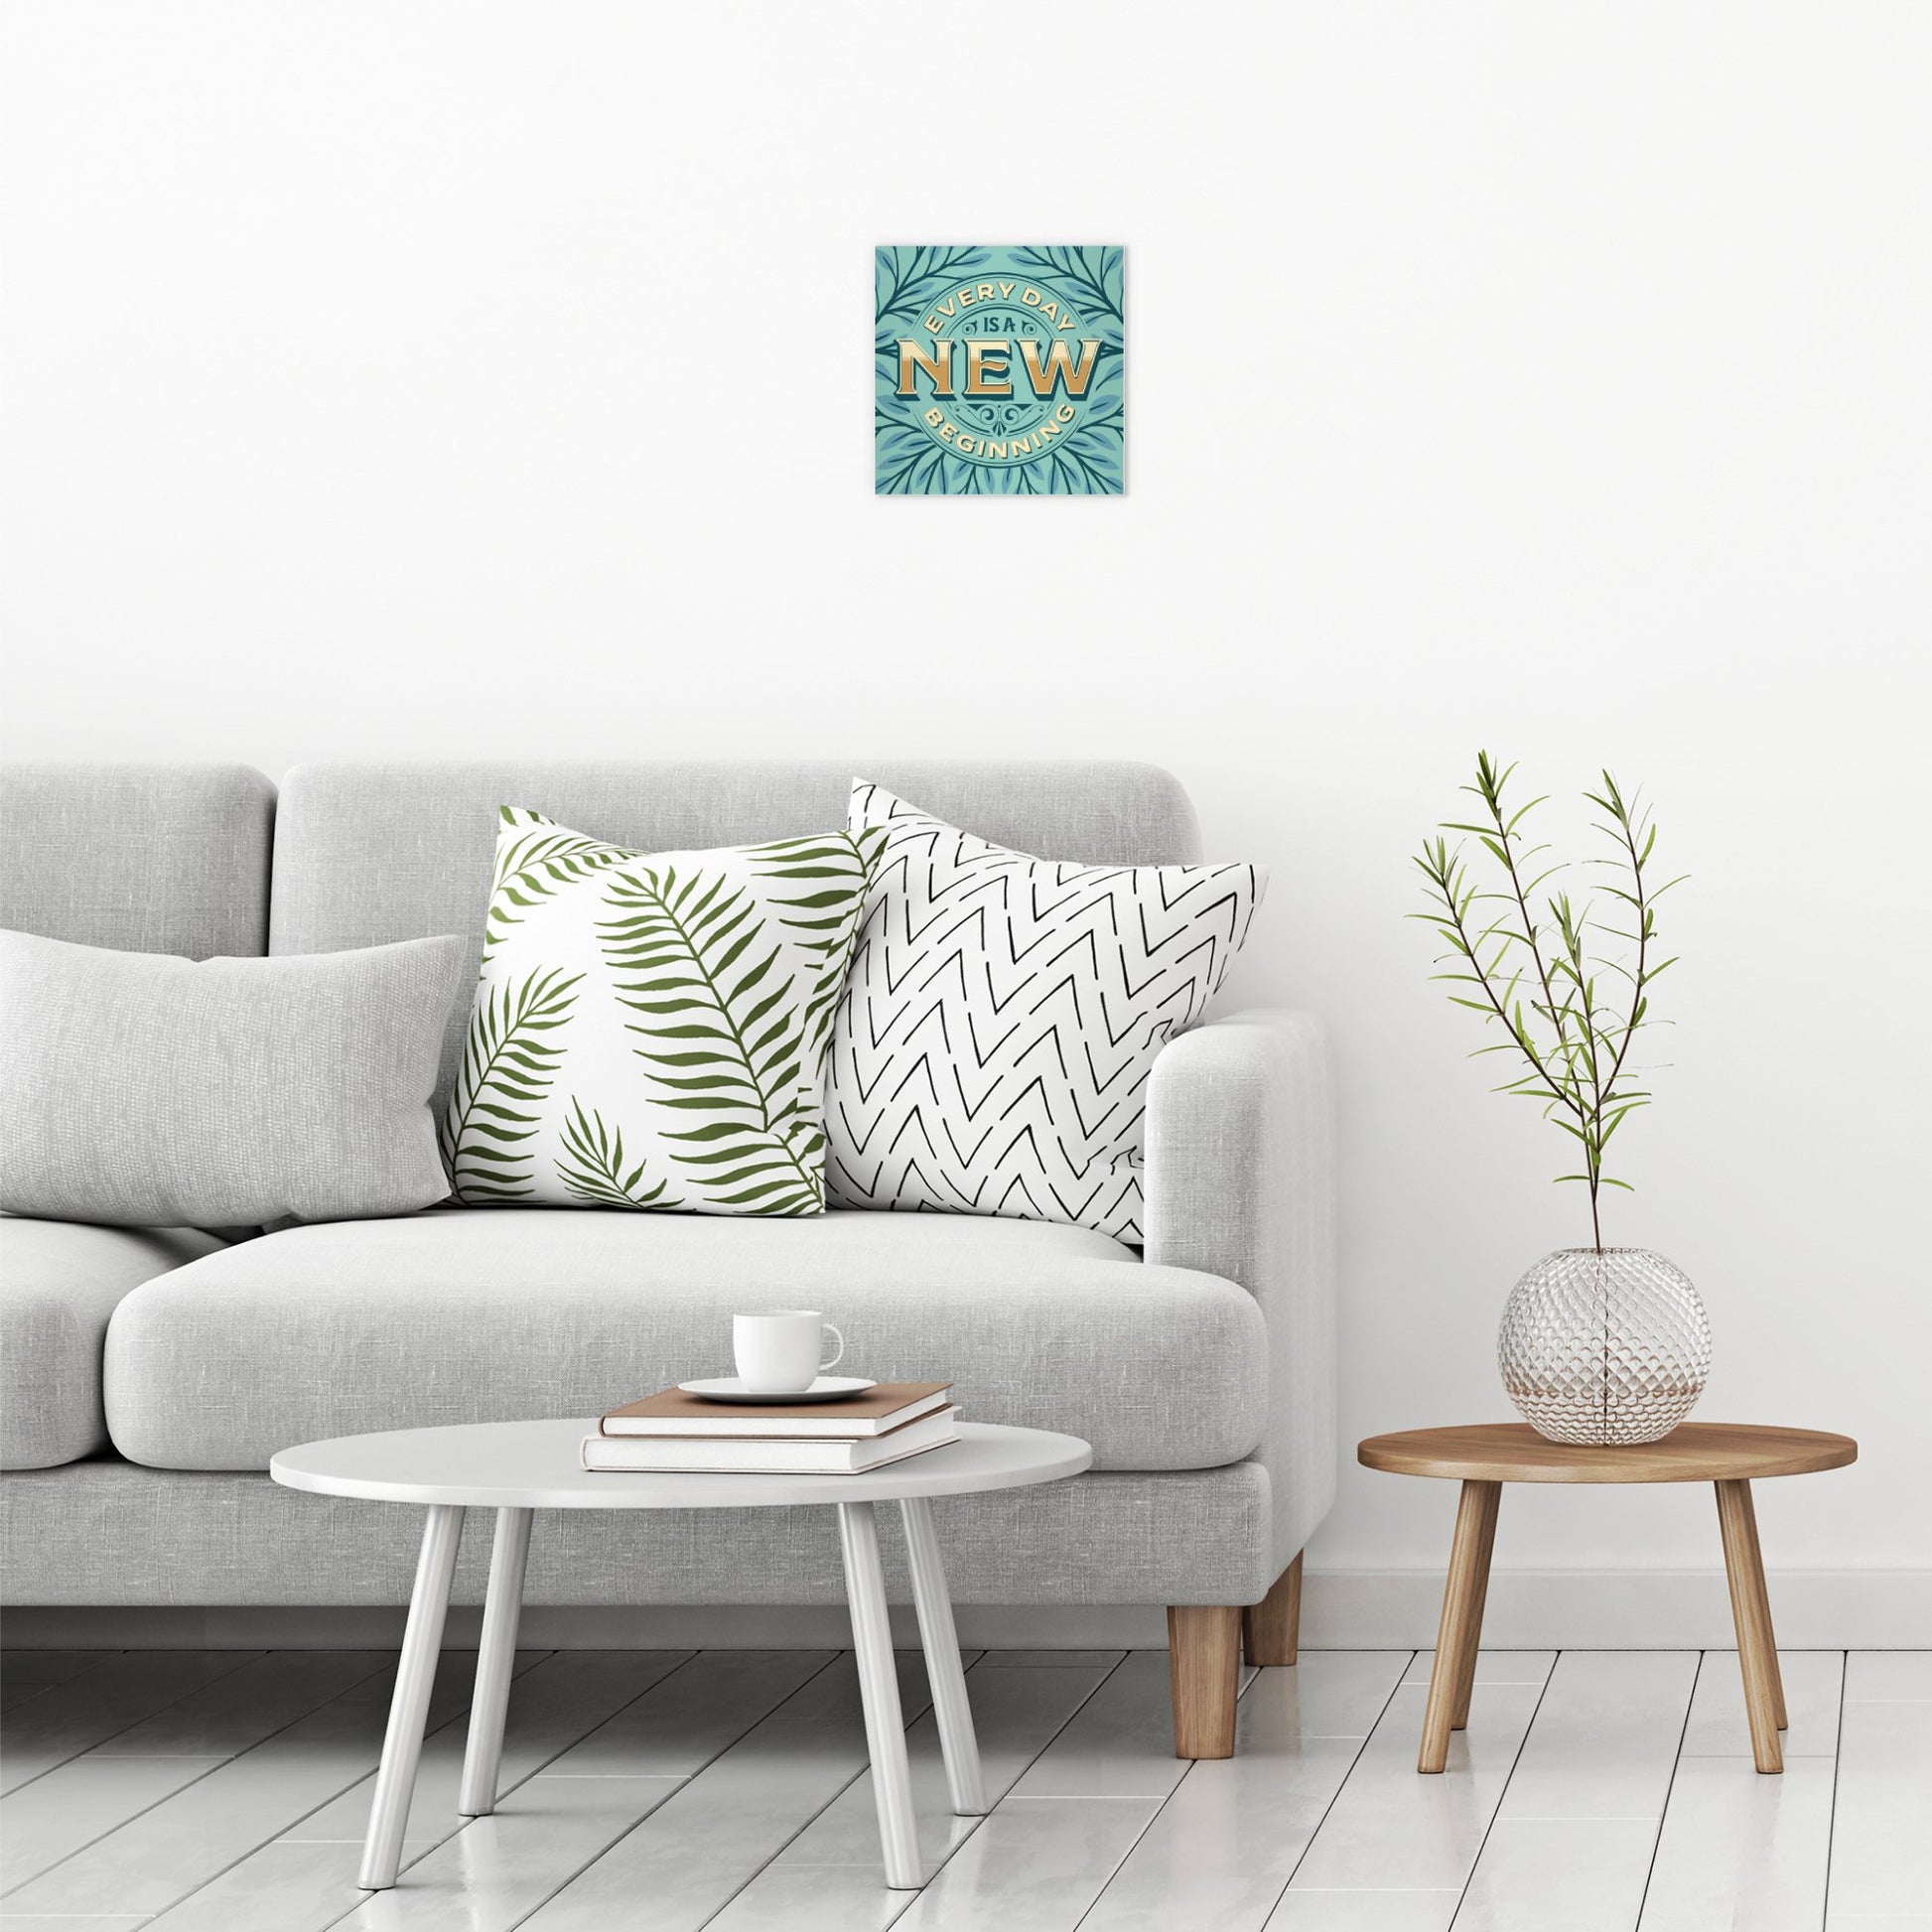 A contemporary modern room view showing a small size metal art poster display plate with printed design of a Every Day is A New Beginning Quote